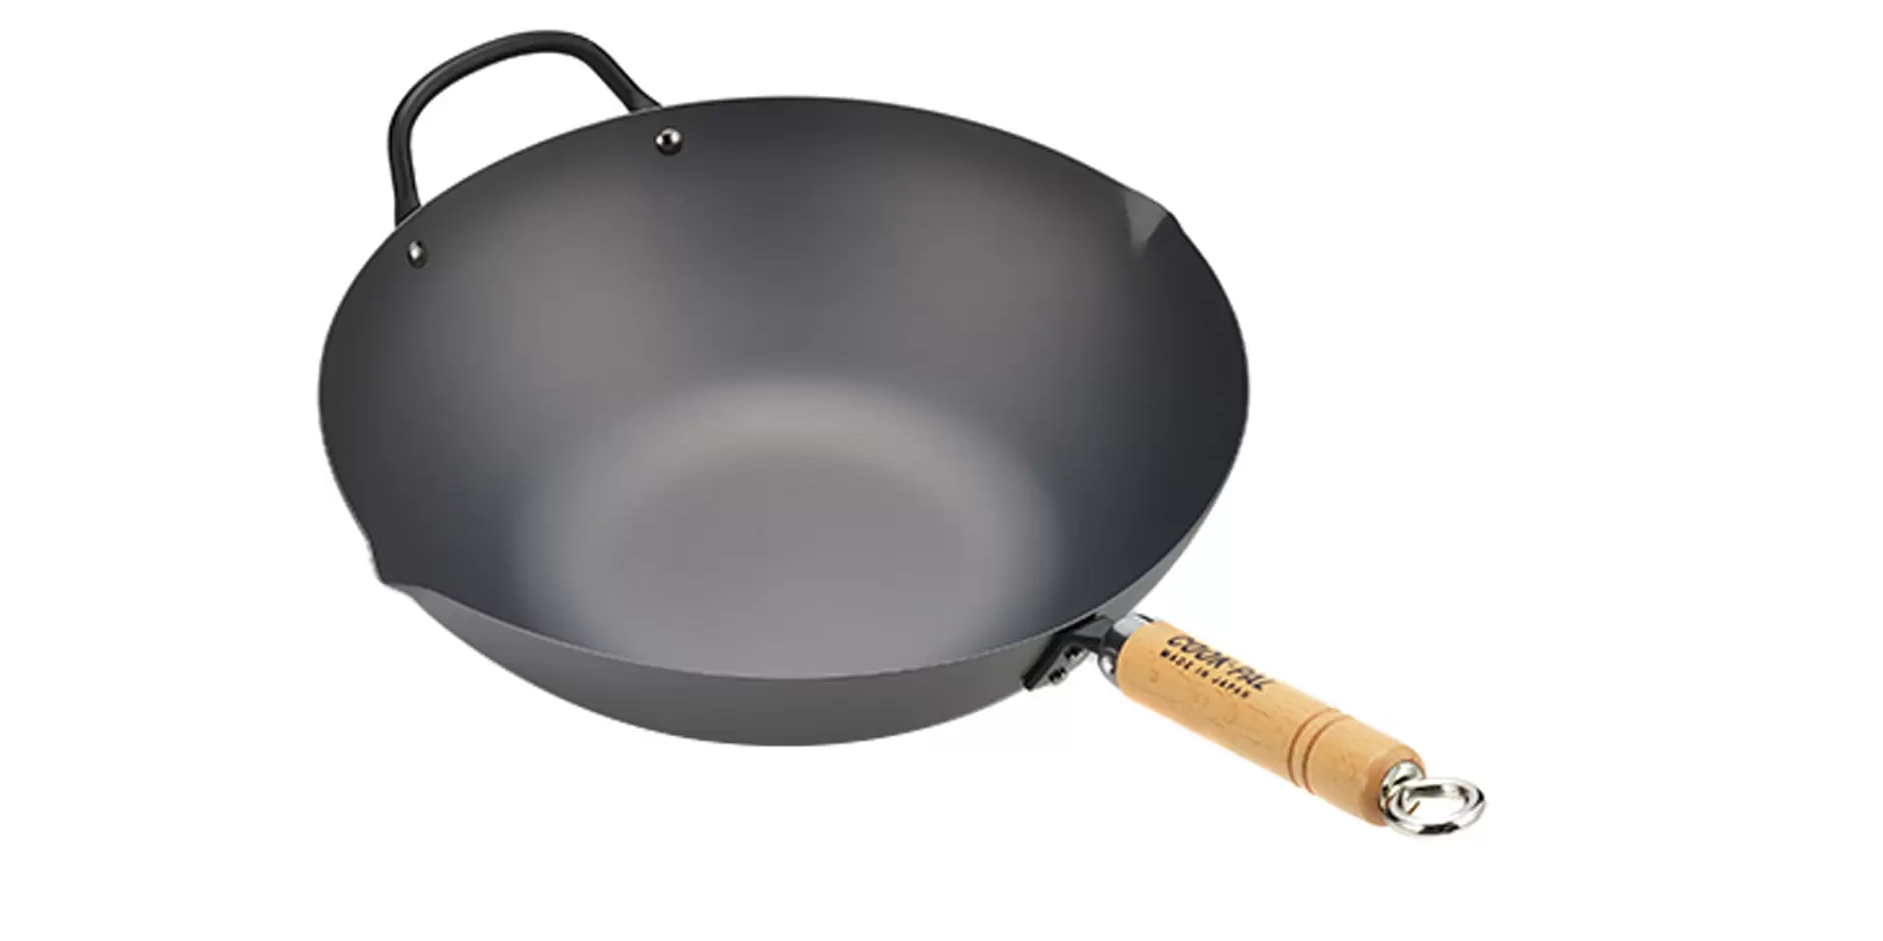 Yoshikawa Cook-pal Ren 32cm Iron Wok YH9918 now $179.99 delivered for Costco members